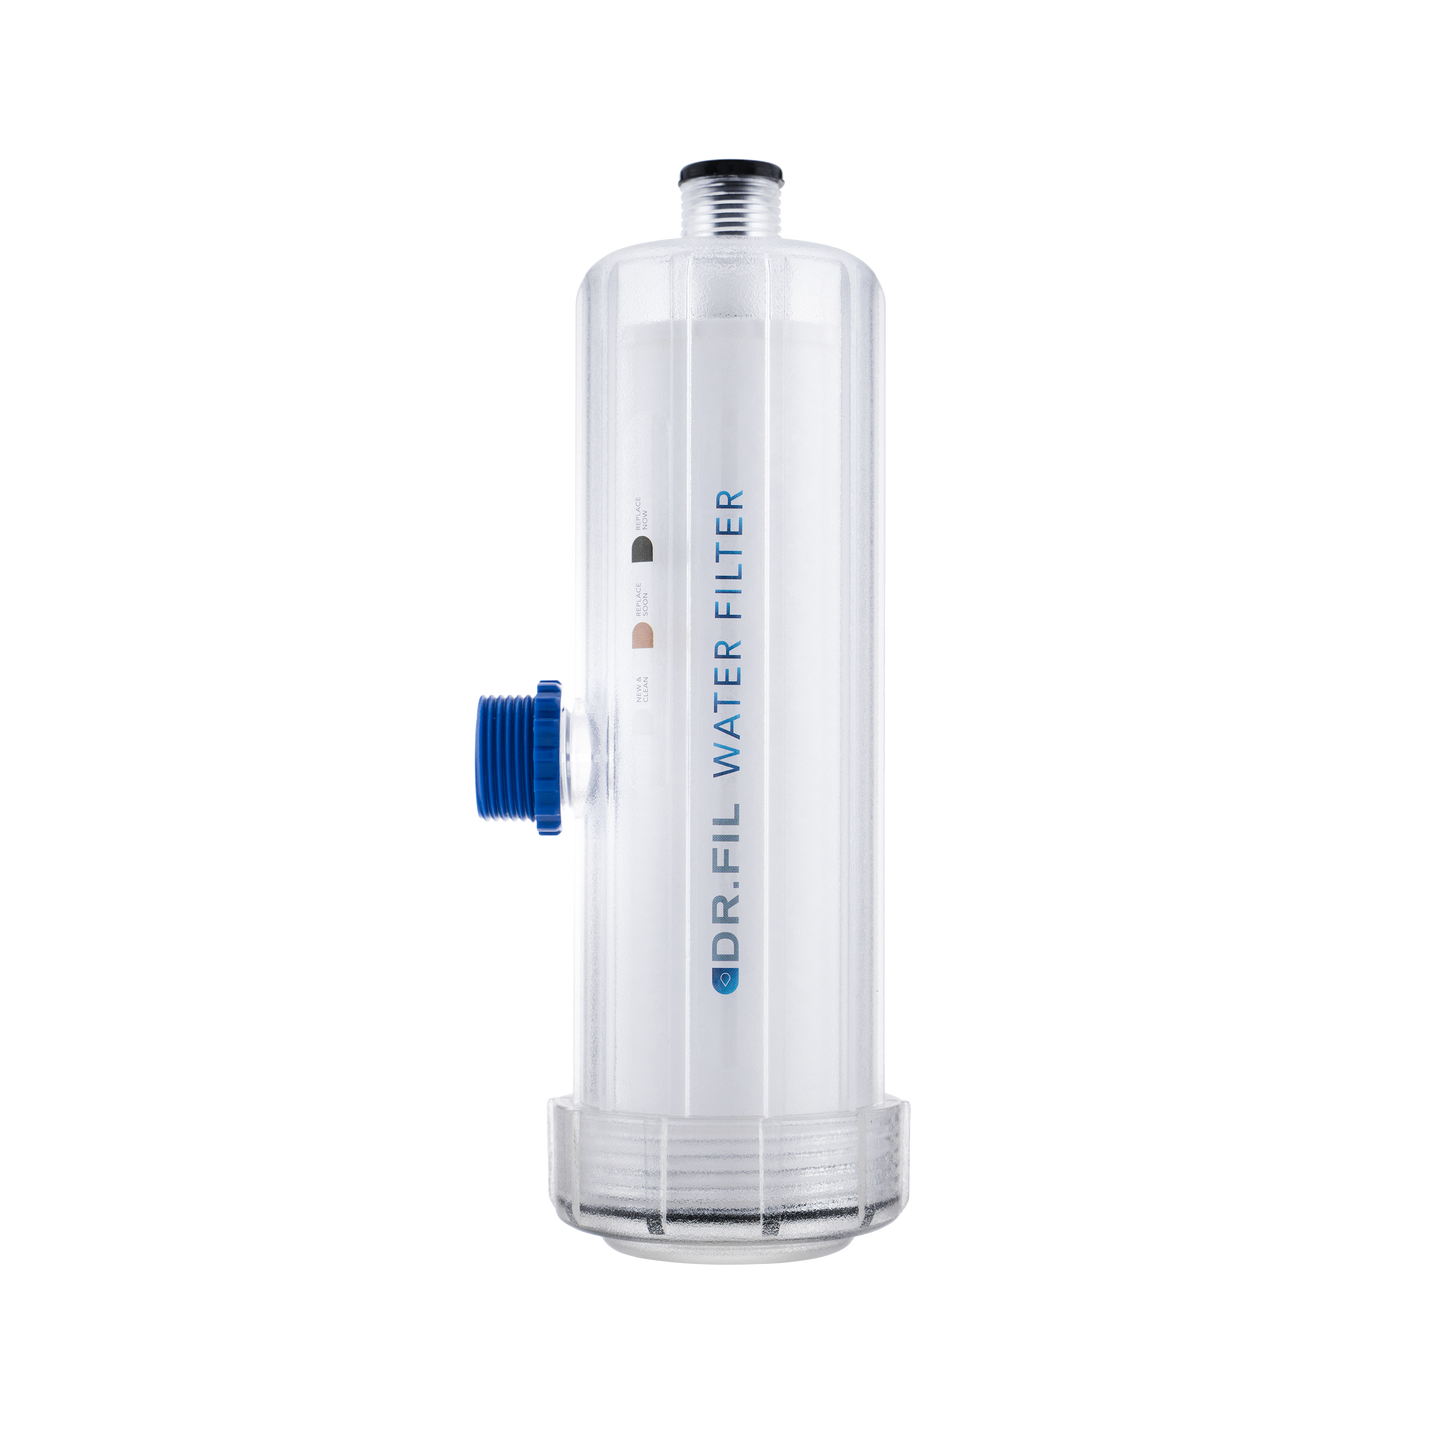 DR.FIL Water Filter Main Body + Filter Cartridges x1 (Without Connection Pipe & Adaptor)